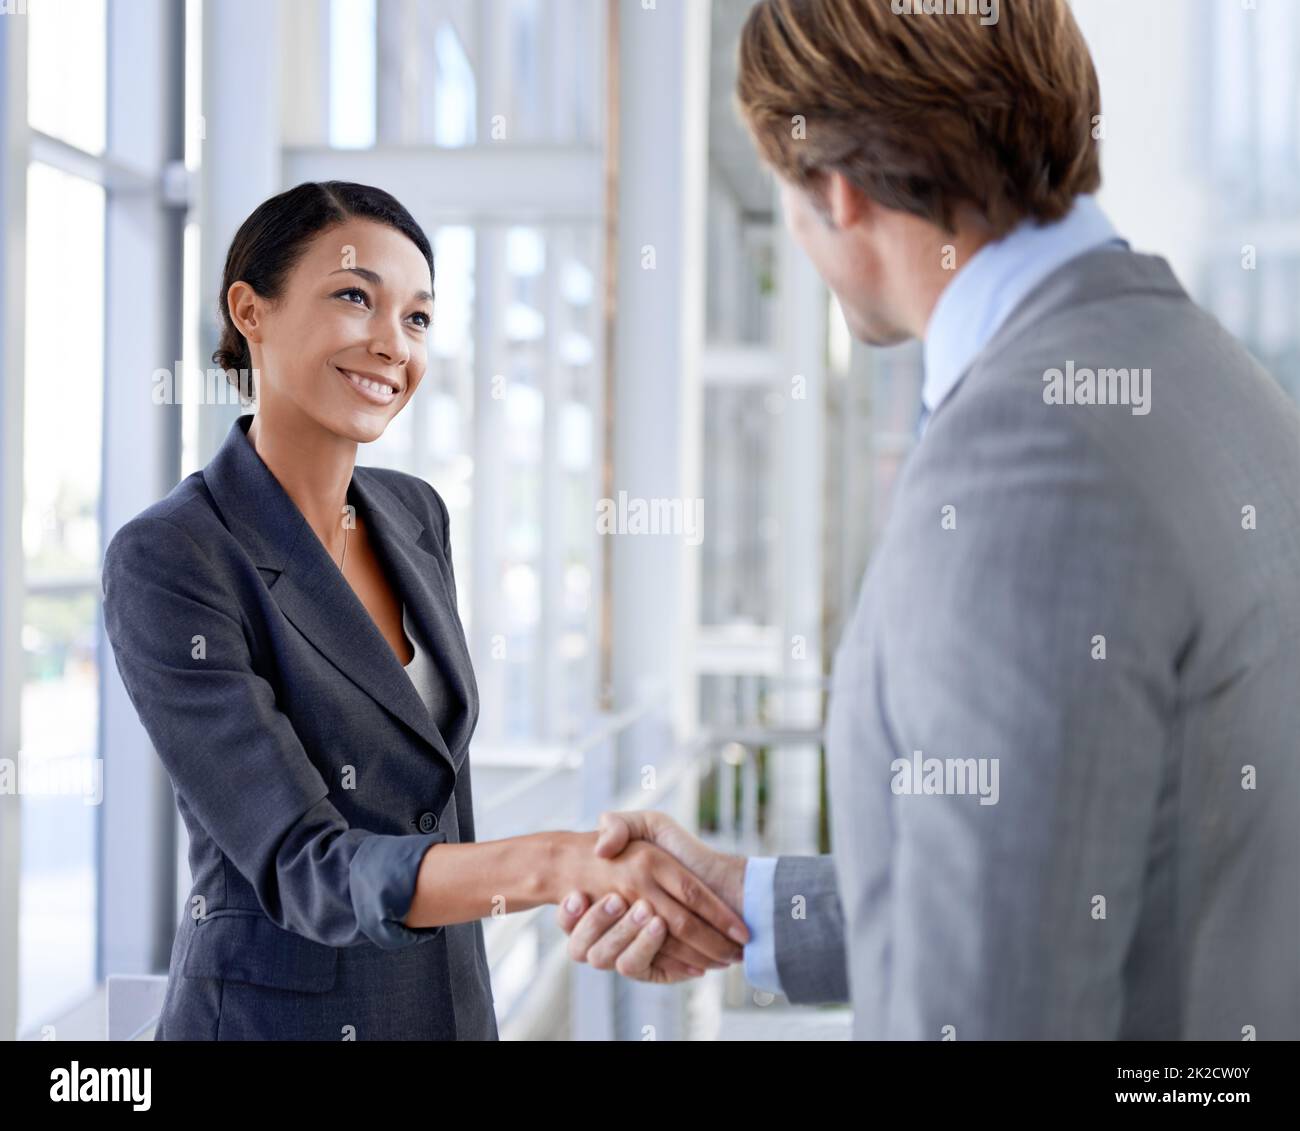 Working their way to the top. Shot of two professional colleagues in an office building. Stock Photo